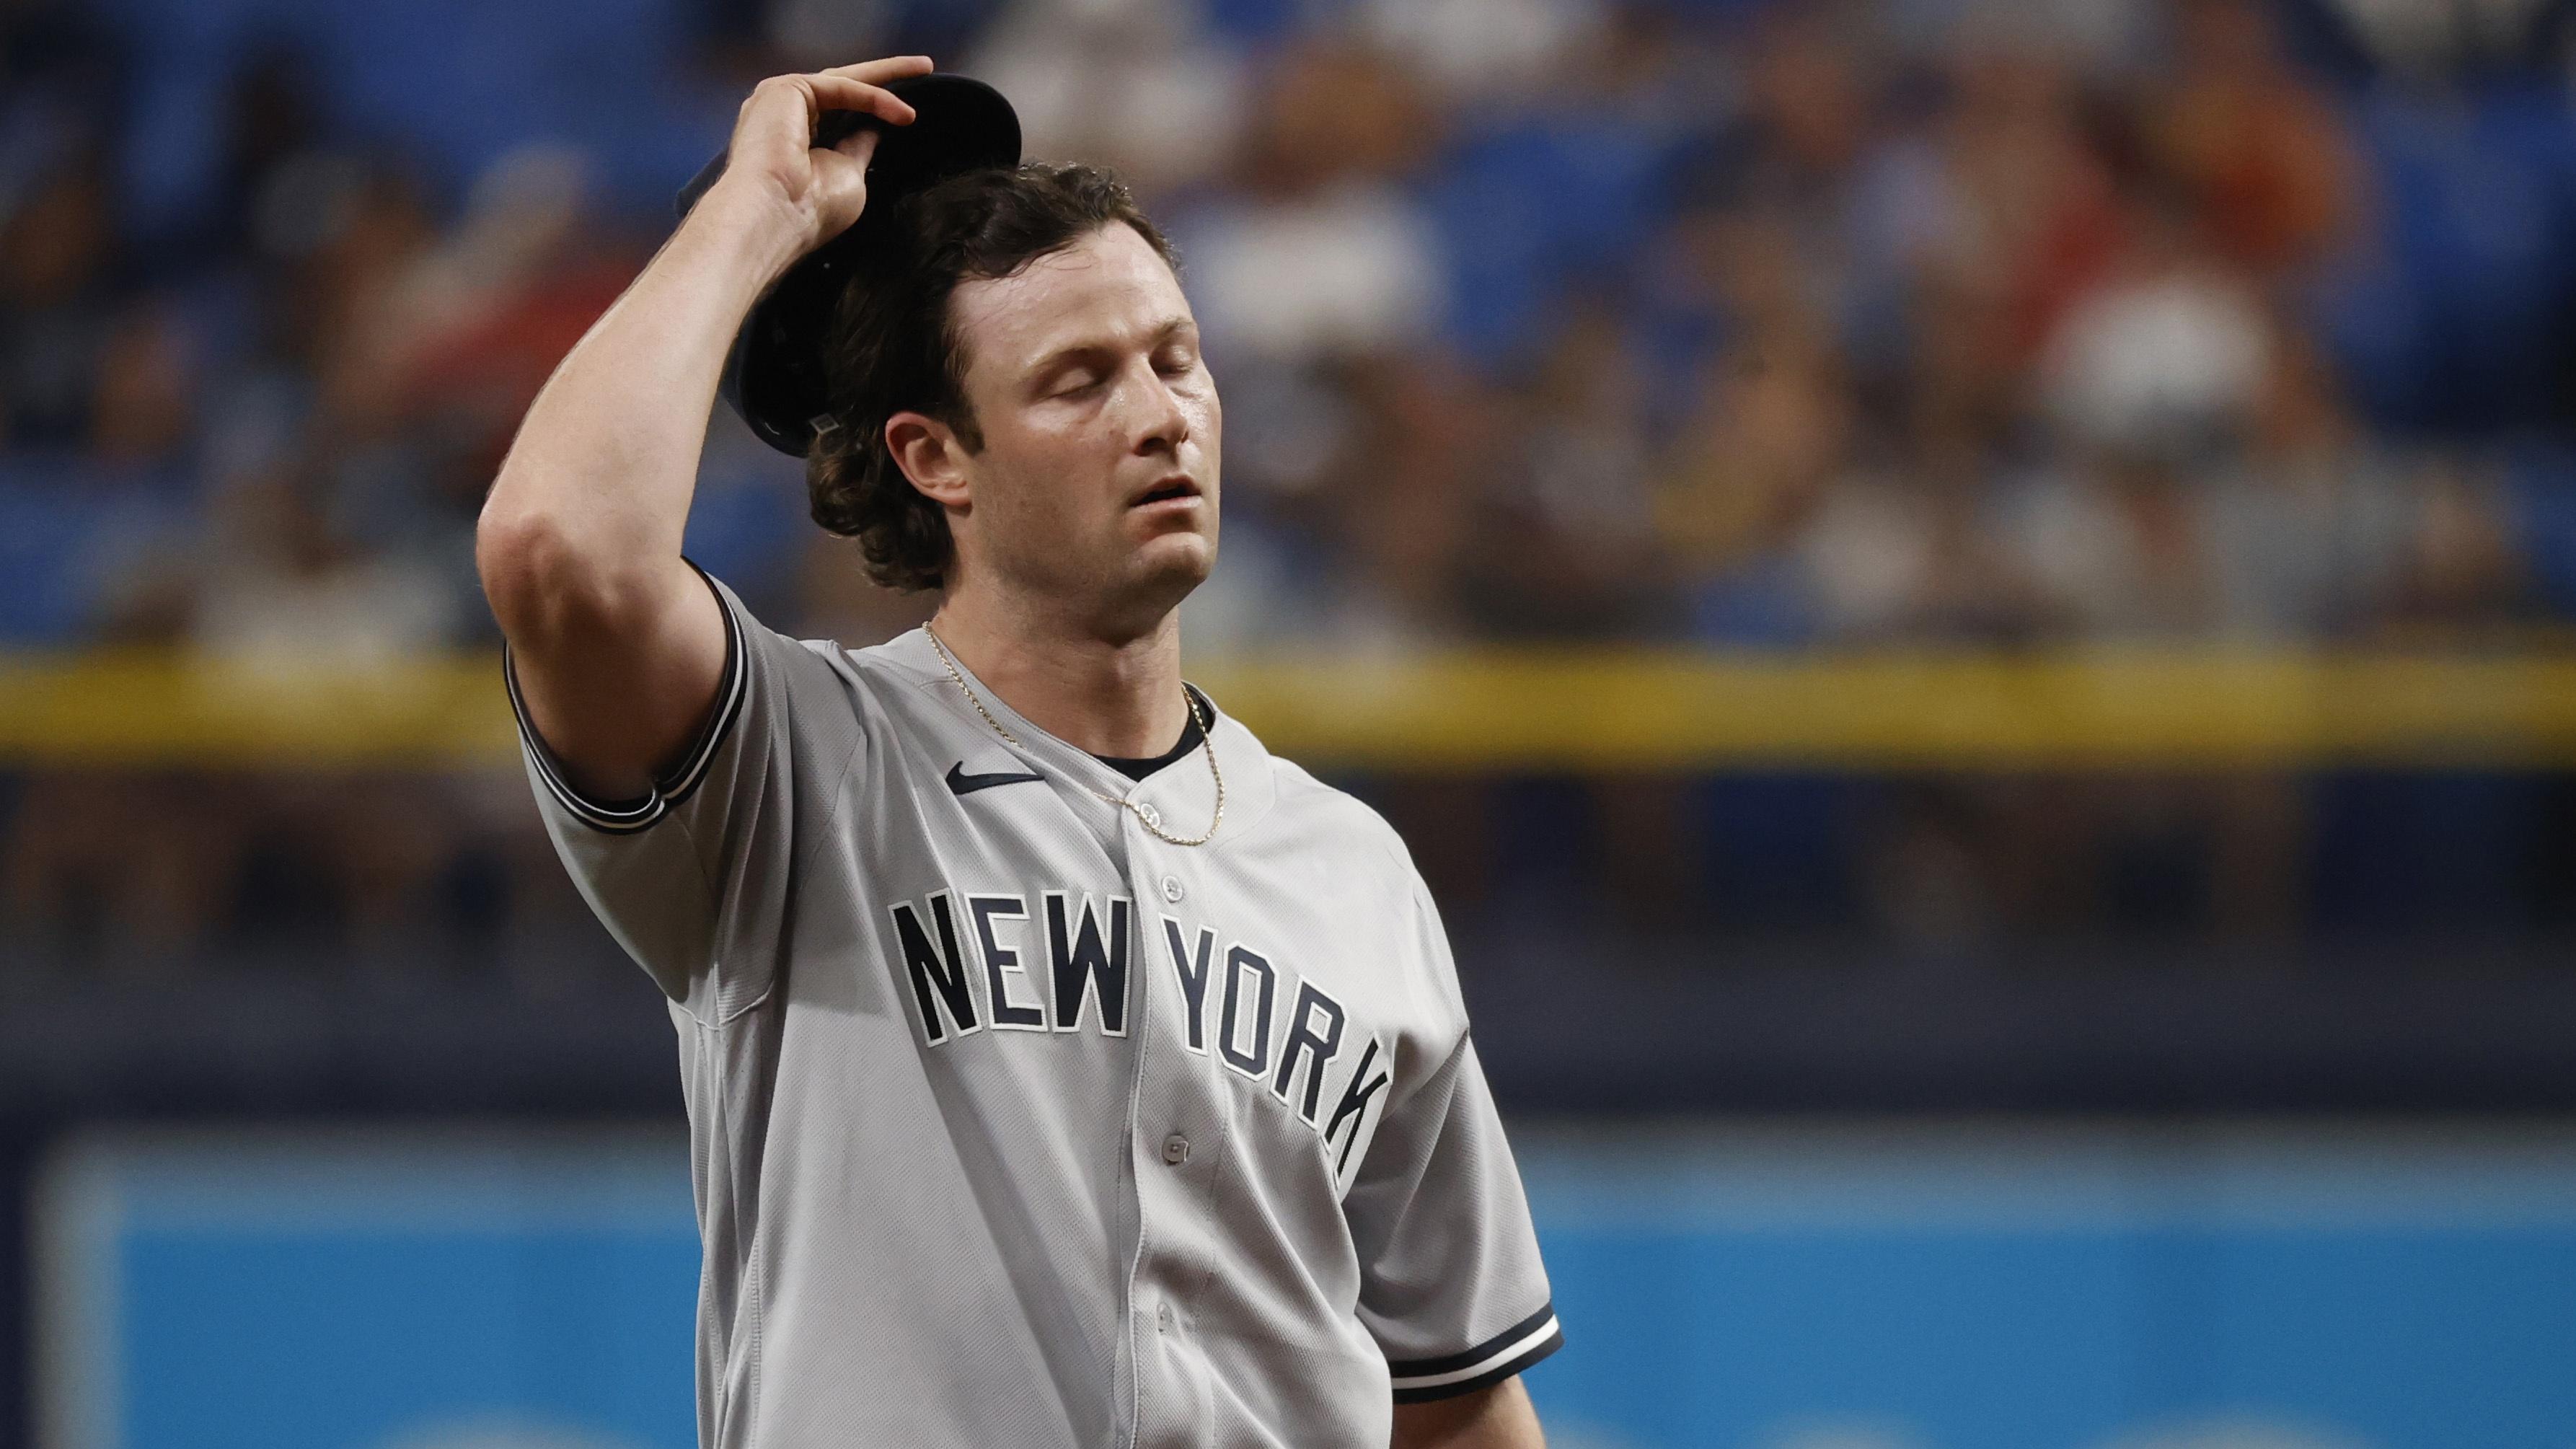 Jul 29, 2021; St. Petersburg, Florida, USA; New York Yankees starting pitcher Gerrit Cole (45) reacts on the mound during the first inning against the Tampa Bay Rays at Tropicana Field. / © Kim Klement-USA TODAY Sports